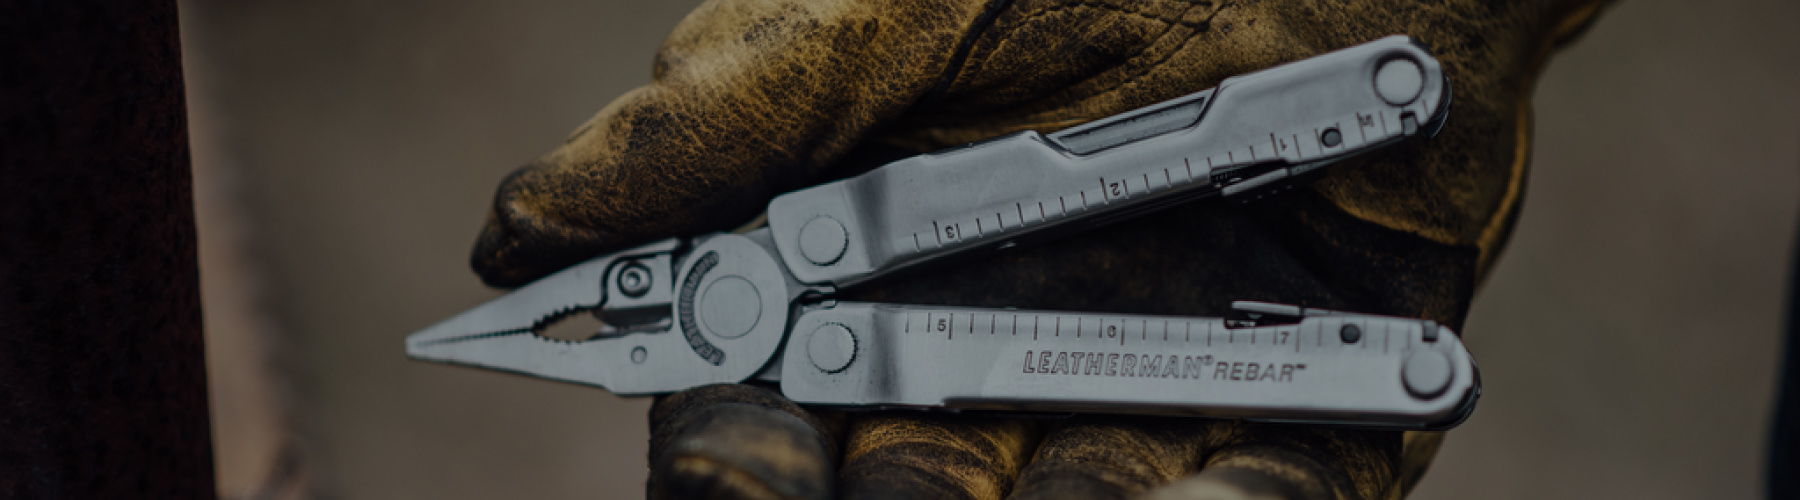 Leatherman Rebar in a gloved hand